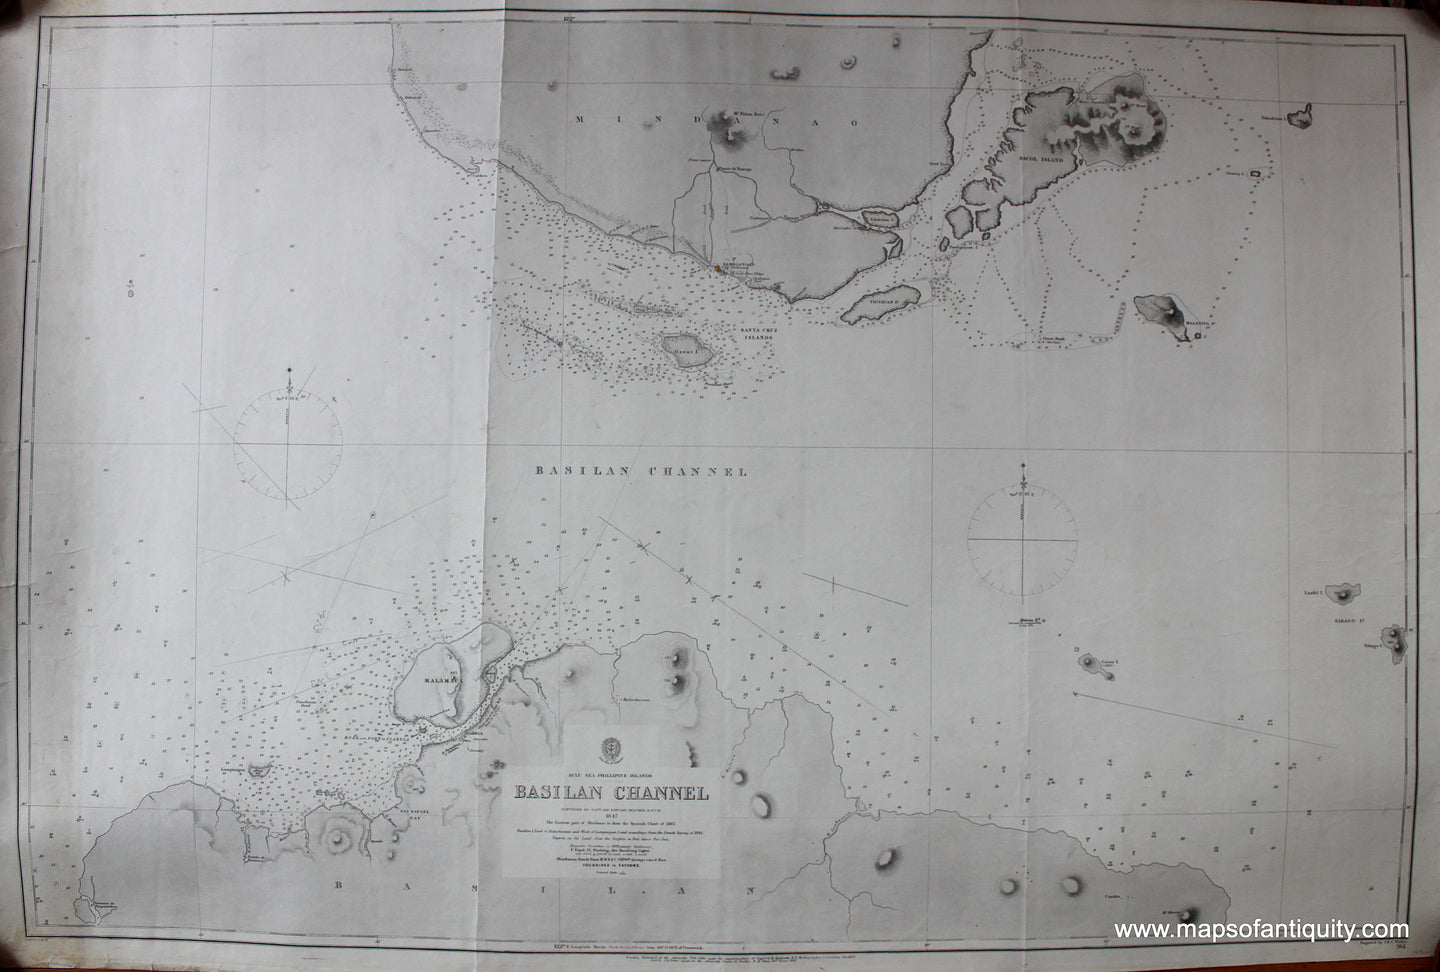 Black-and-White-Antique-Chart-Philippines---Basilan-Channel****-Pacific-Philippines-1870-British-Admiralty-Maps-Of-Antiquity